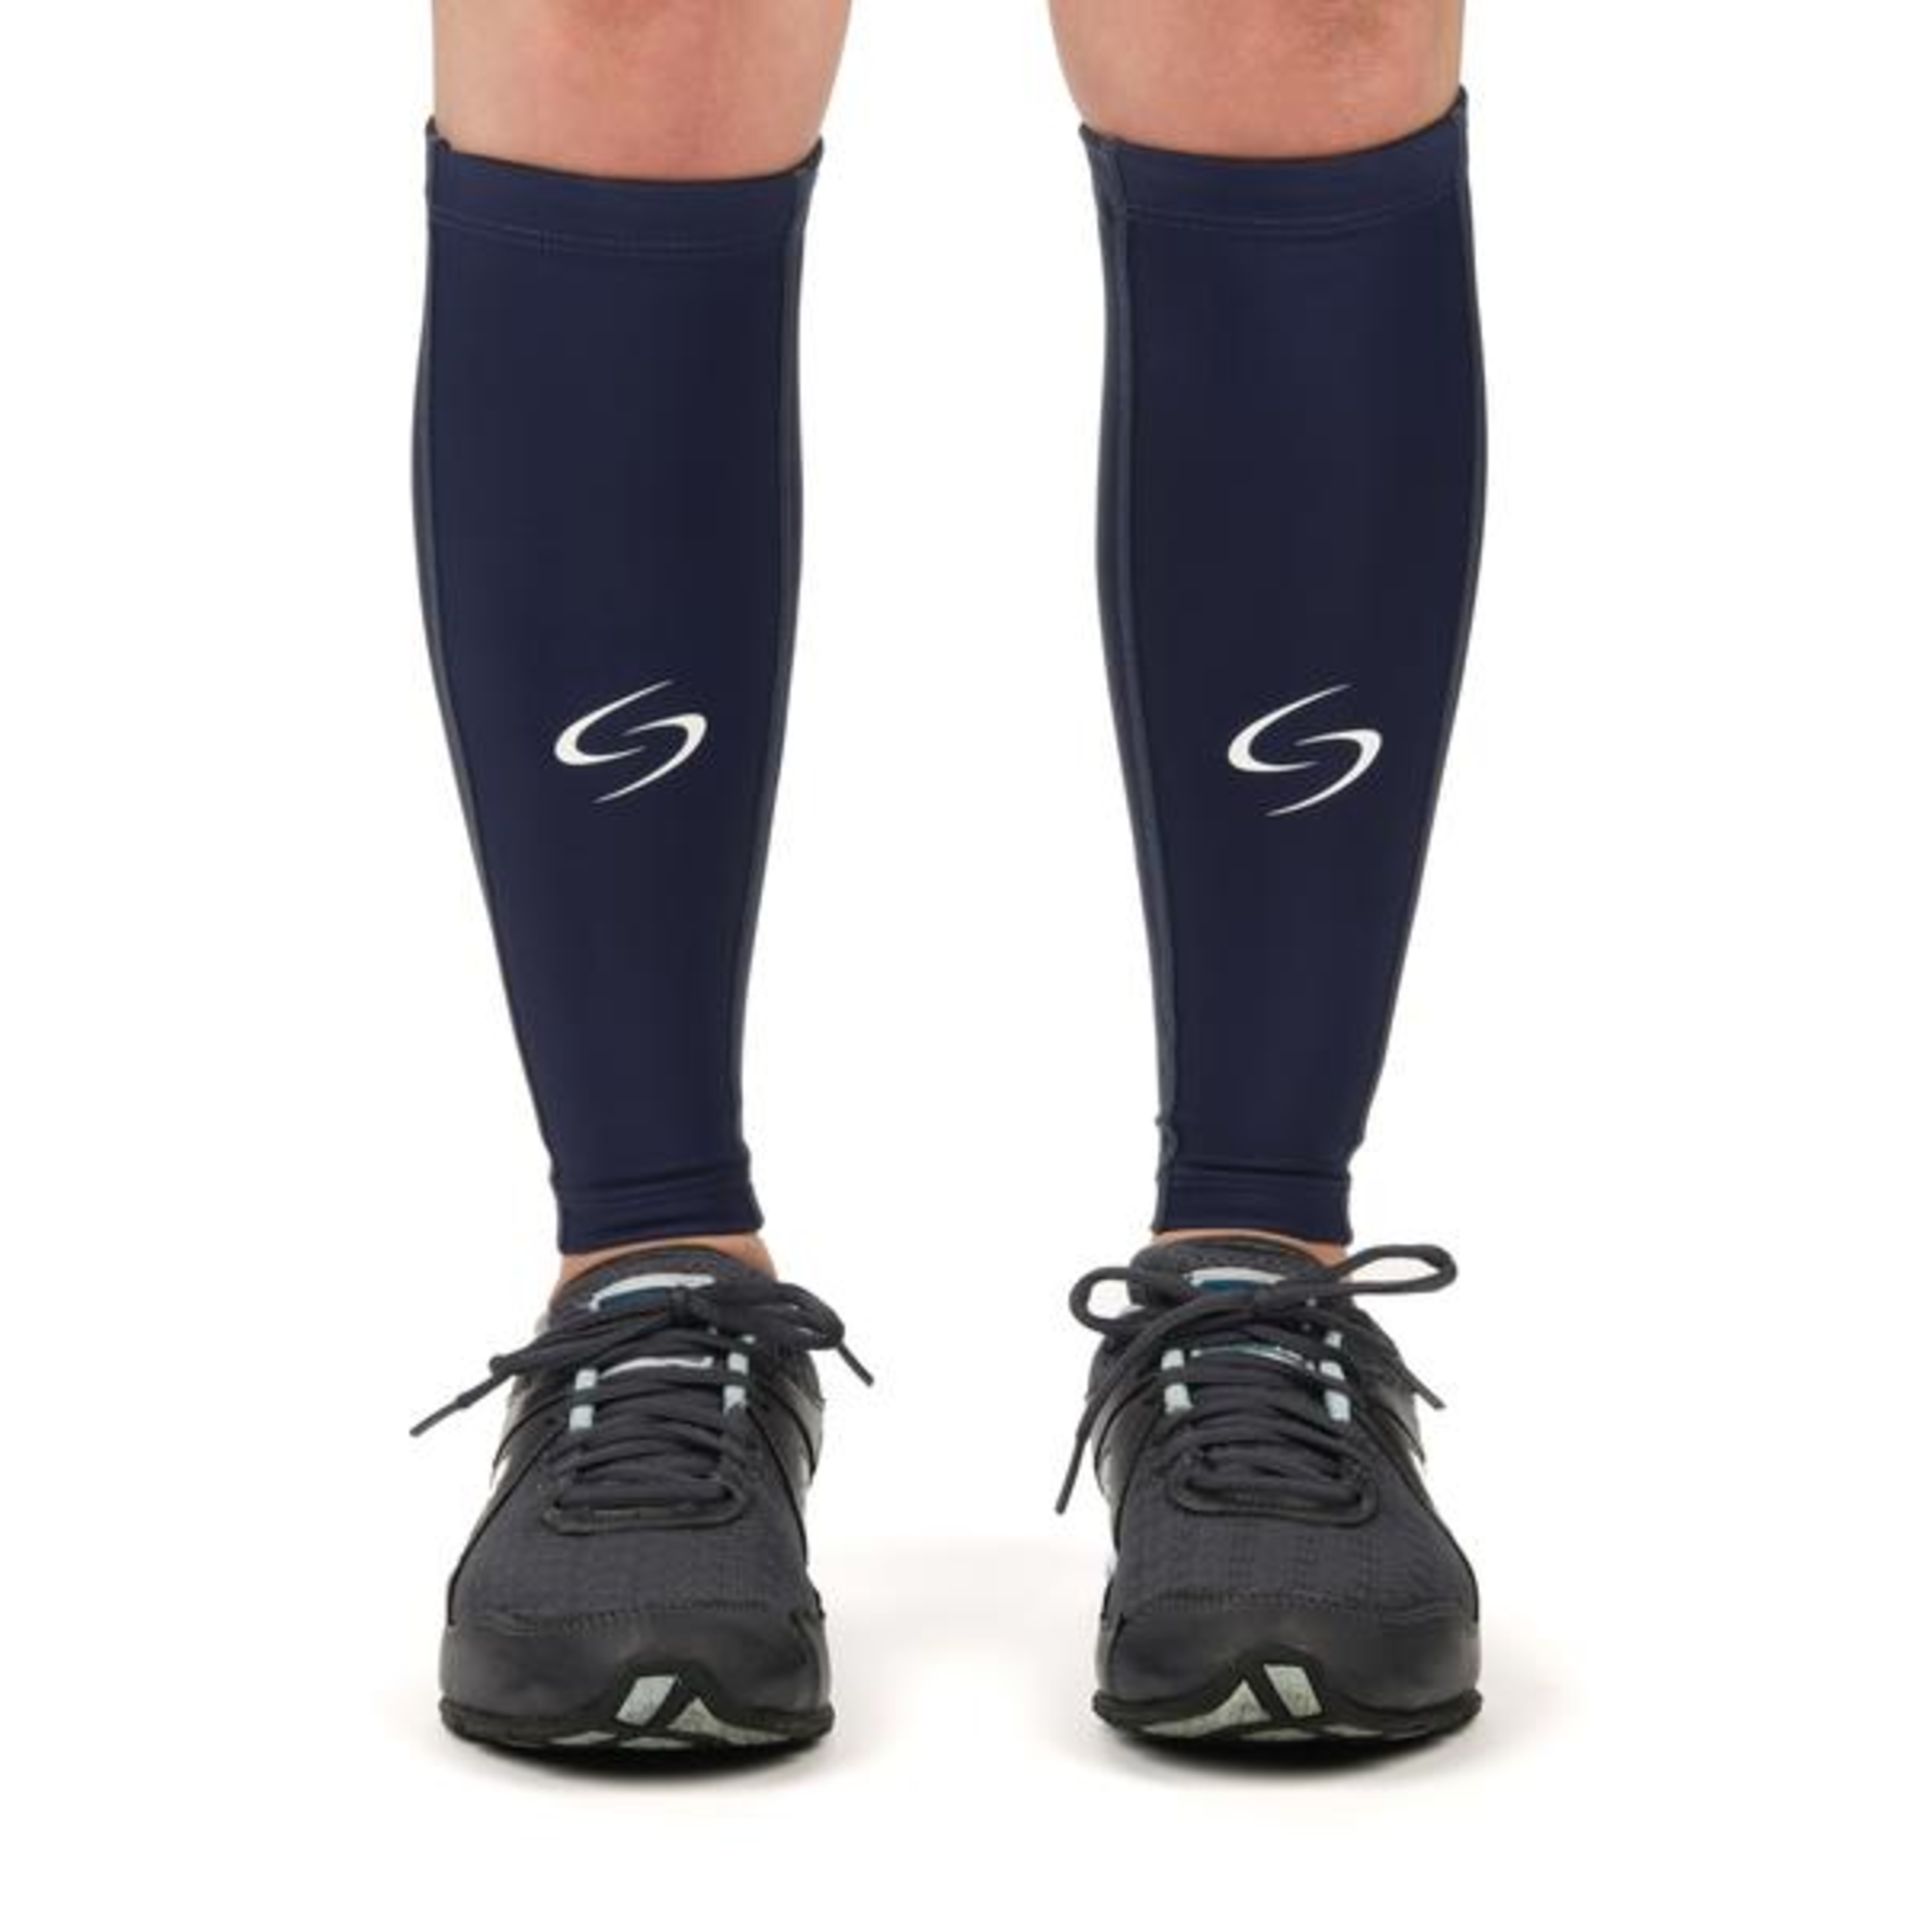 60 X BRAND NEW SHARWOOD SPORTS BRANDED PAIRS OF CALF COMPRESSION SLEEVES - BLUE - MEDIUM - (PICK